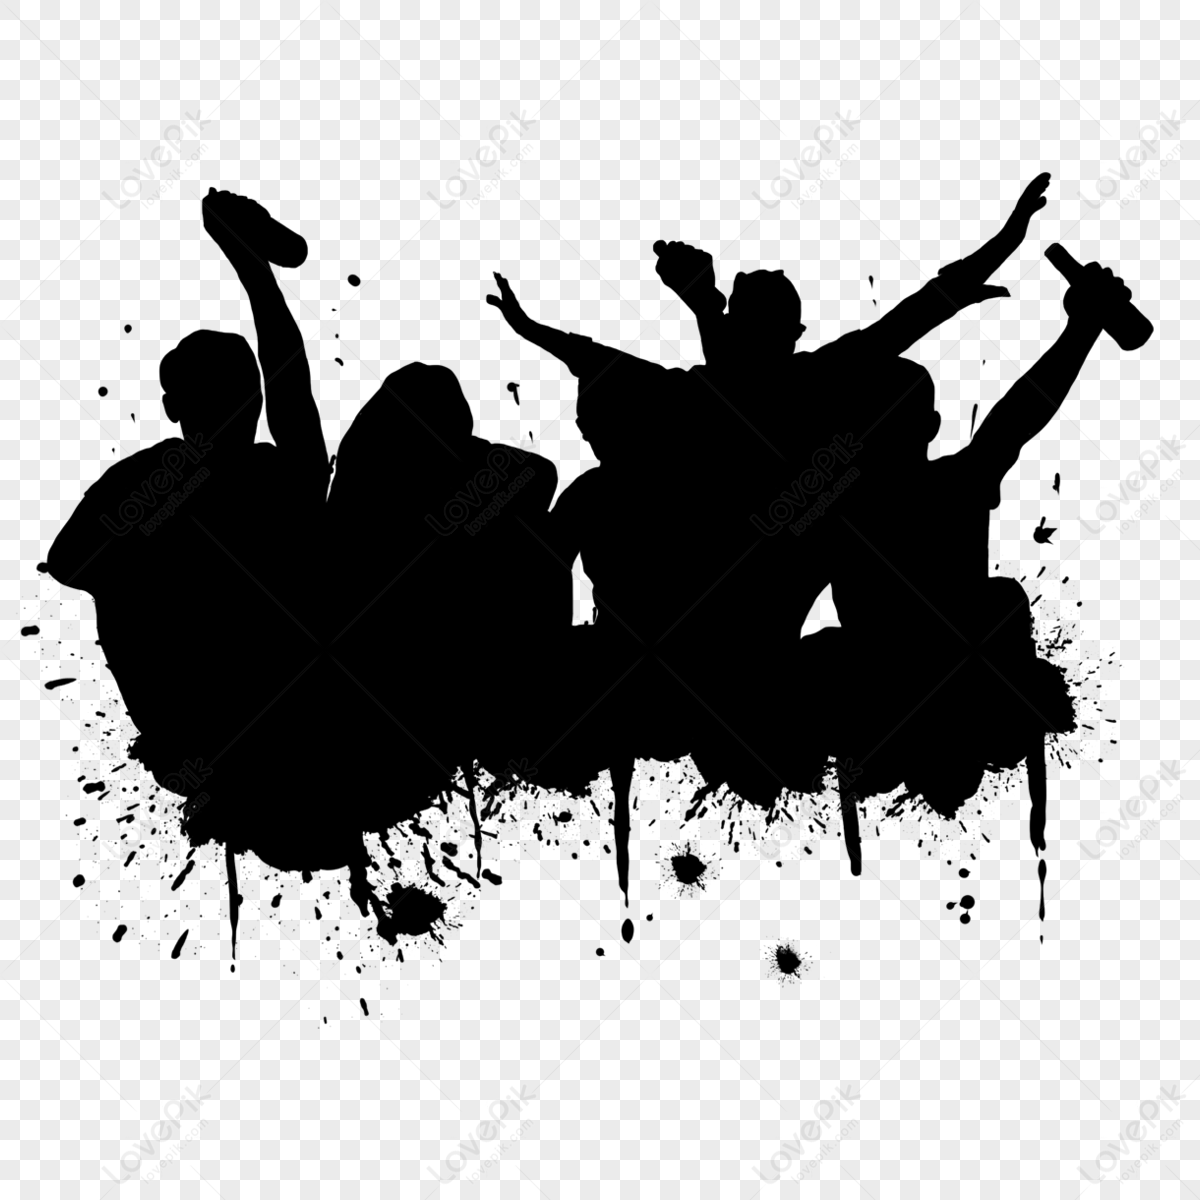 Dance Party Silhouette PNG Images With Transparent Background | Free ...